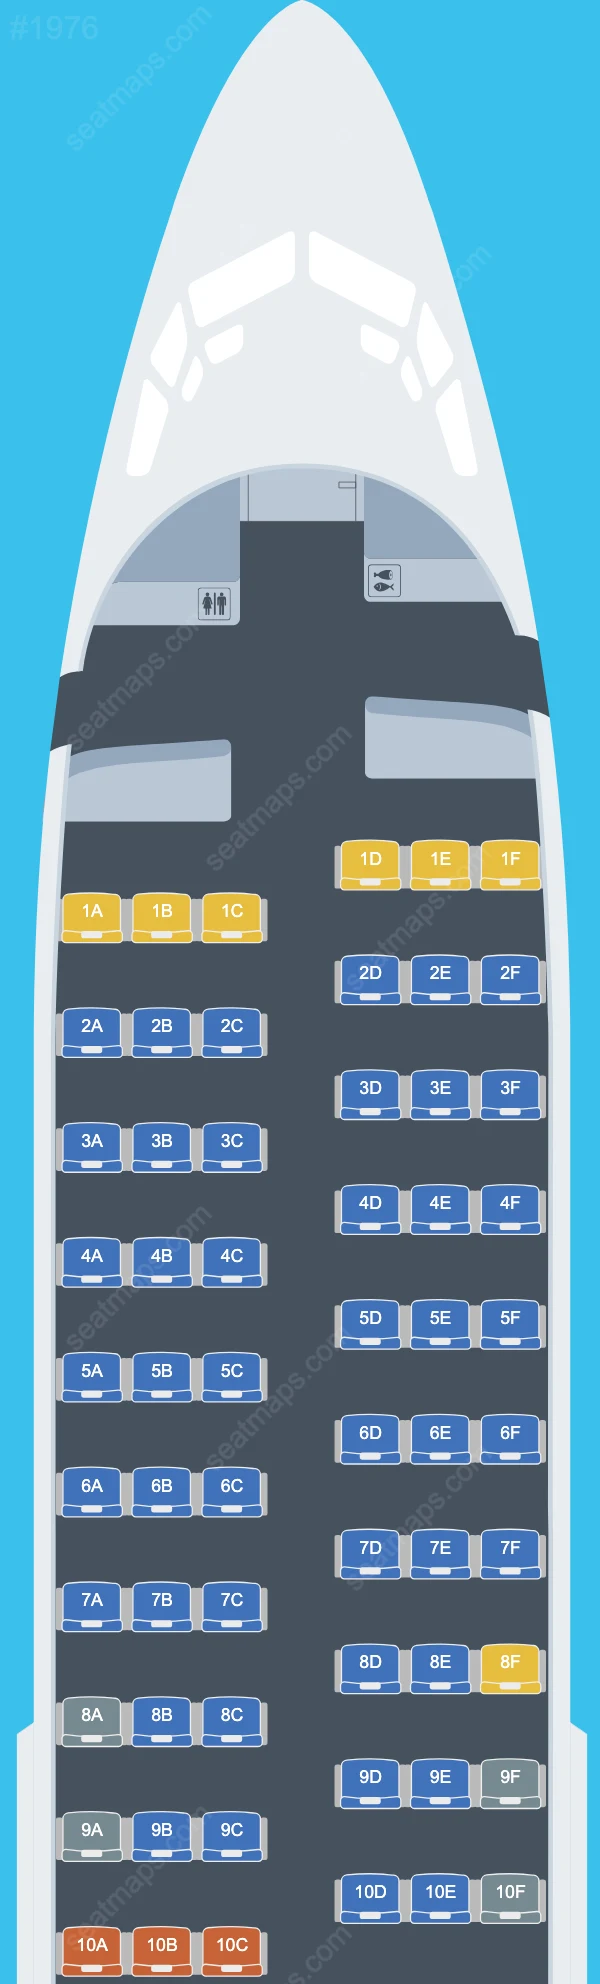 Southwest Airlines Boeing 737 Seat Maps 737-700